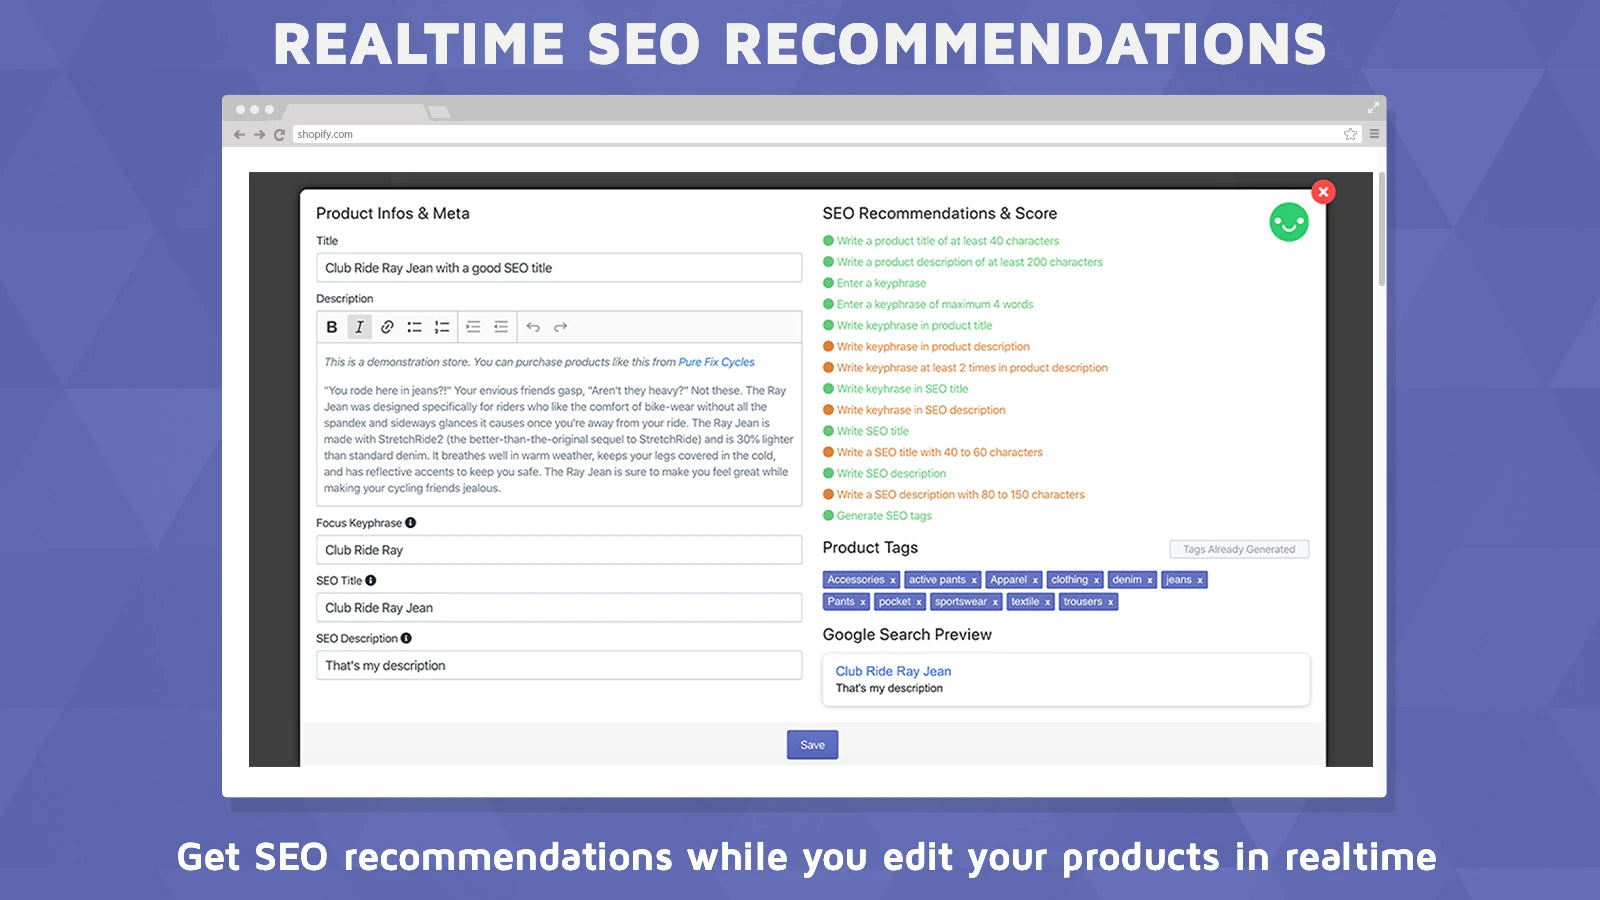 GoSEO ‑ SEO Products Optimizer get SEO recommendations while you edit your products in realtime